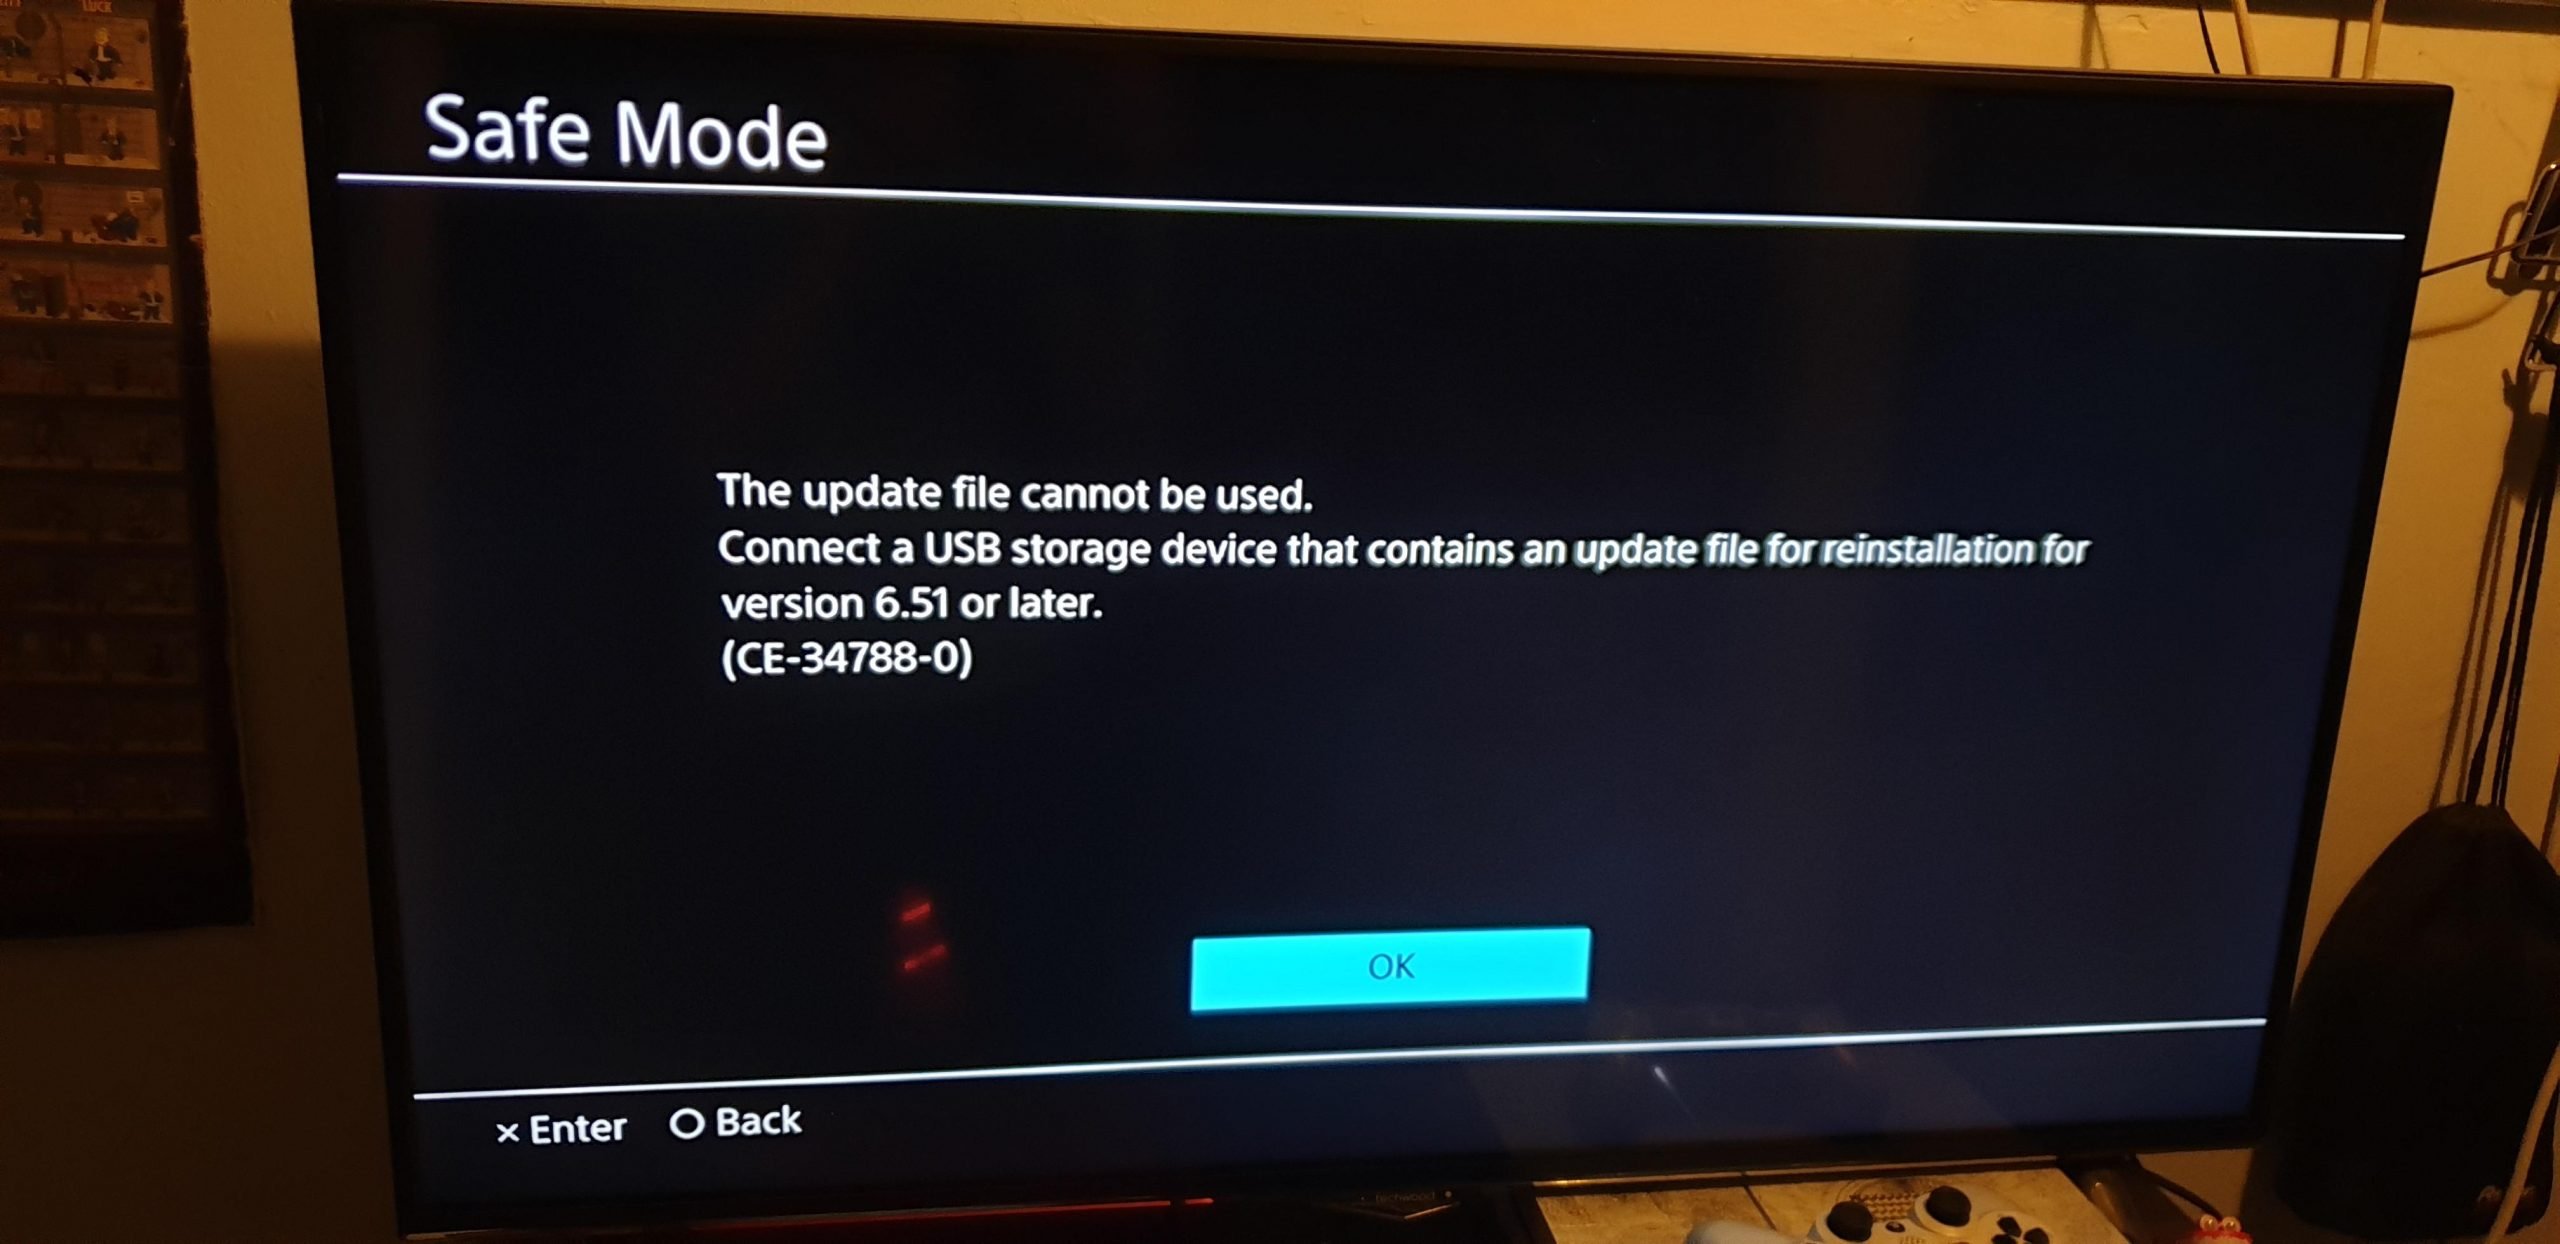 [Image] PS4 stuck in an endless safe mode loop. Says that ...